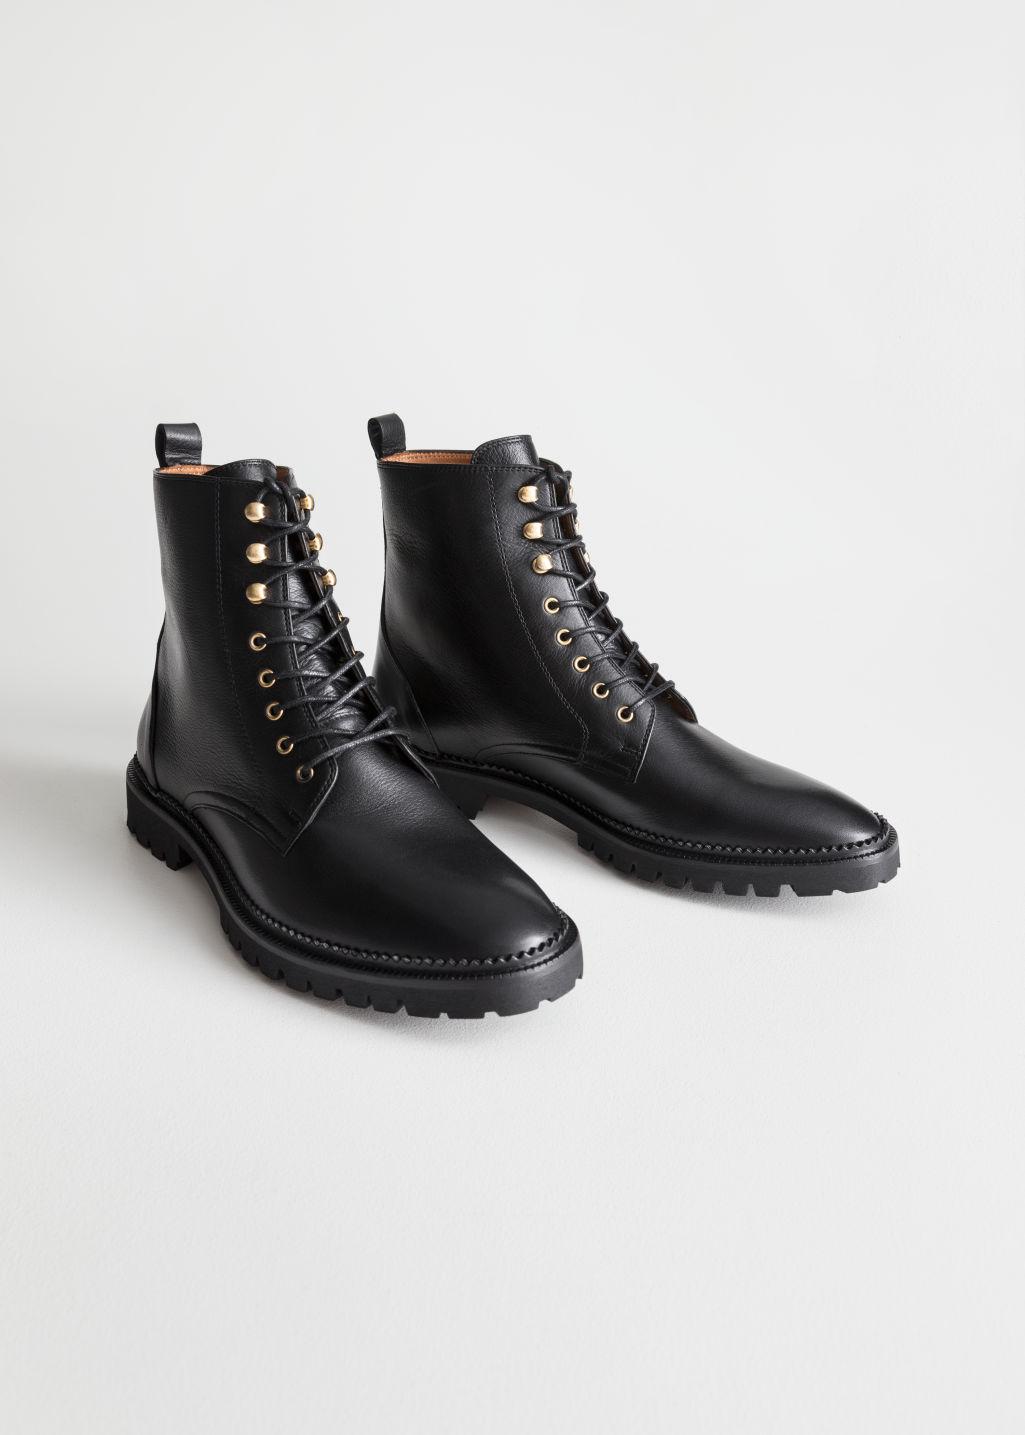 & other stories lace up leather boots